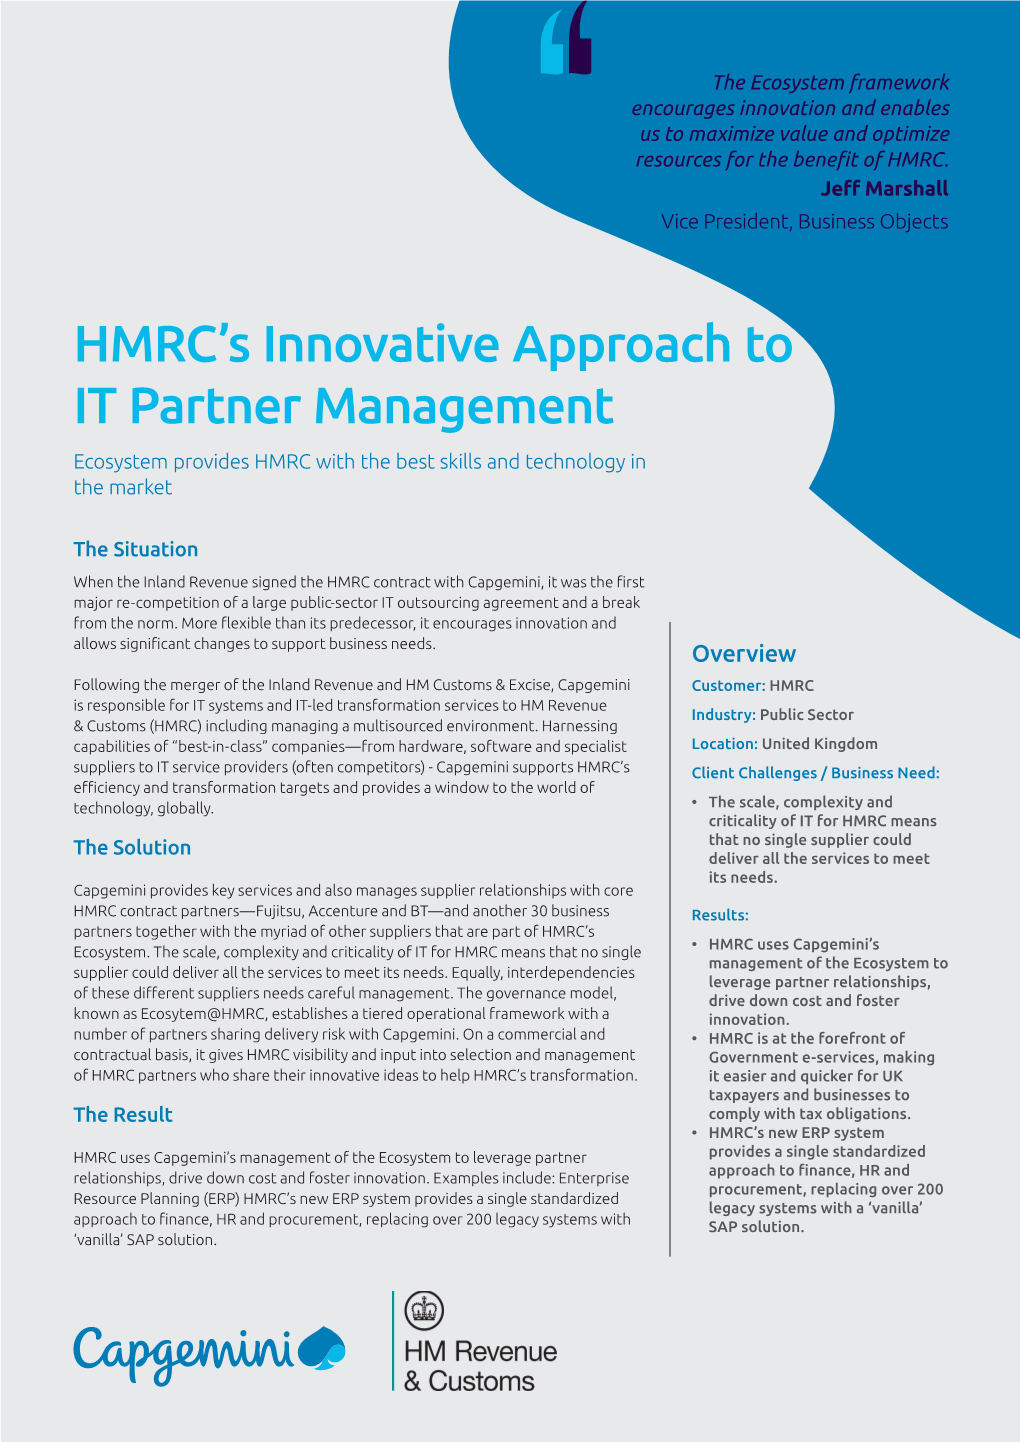 HMRC's Innovative Approach to IT Partner Management